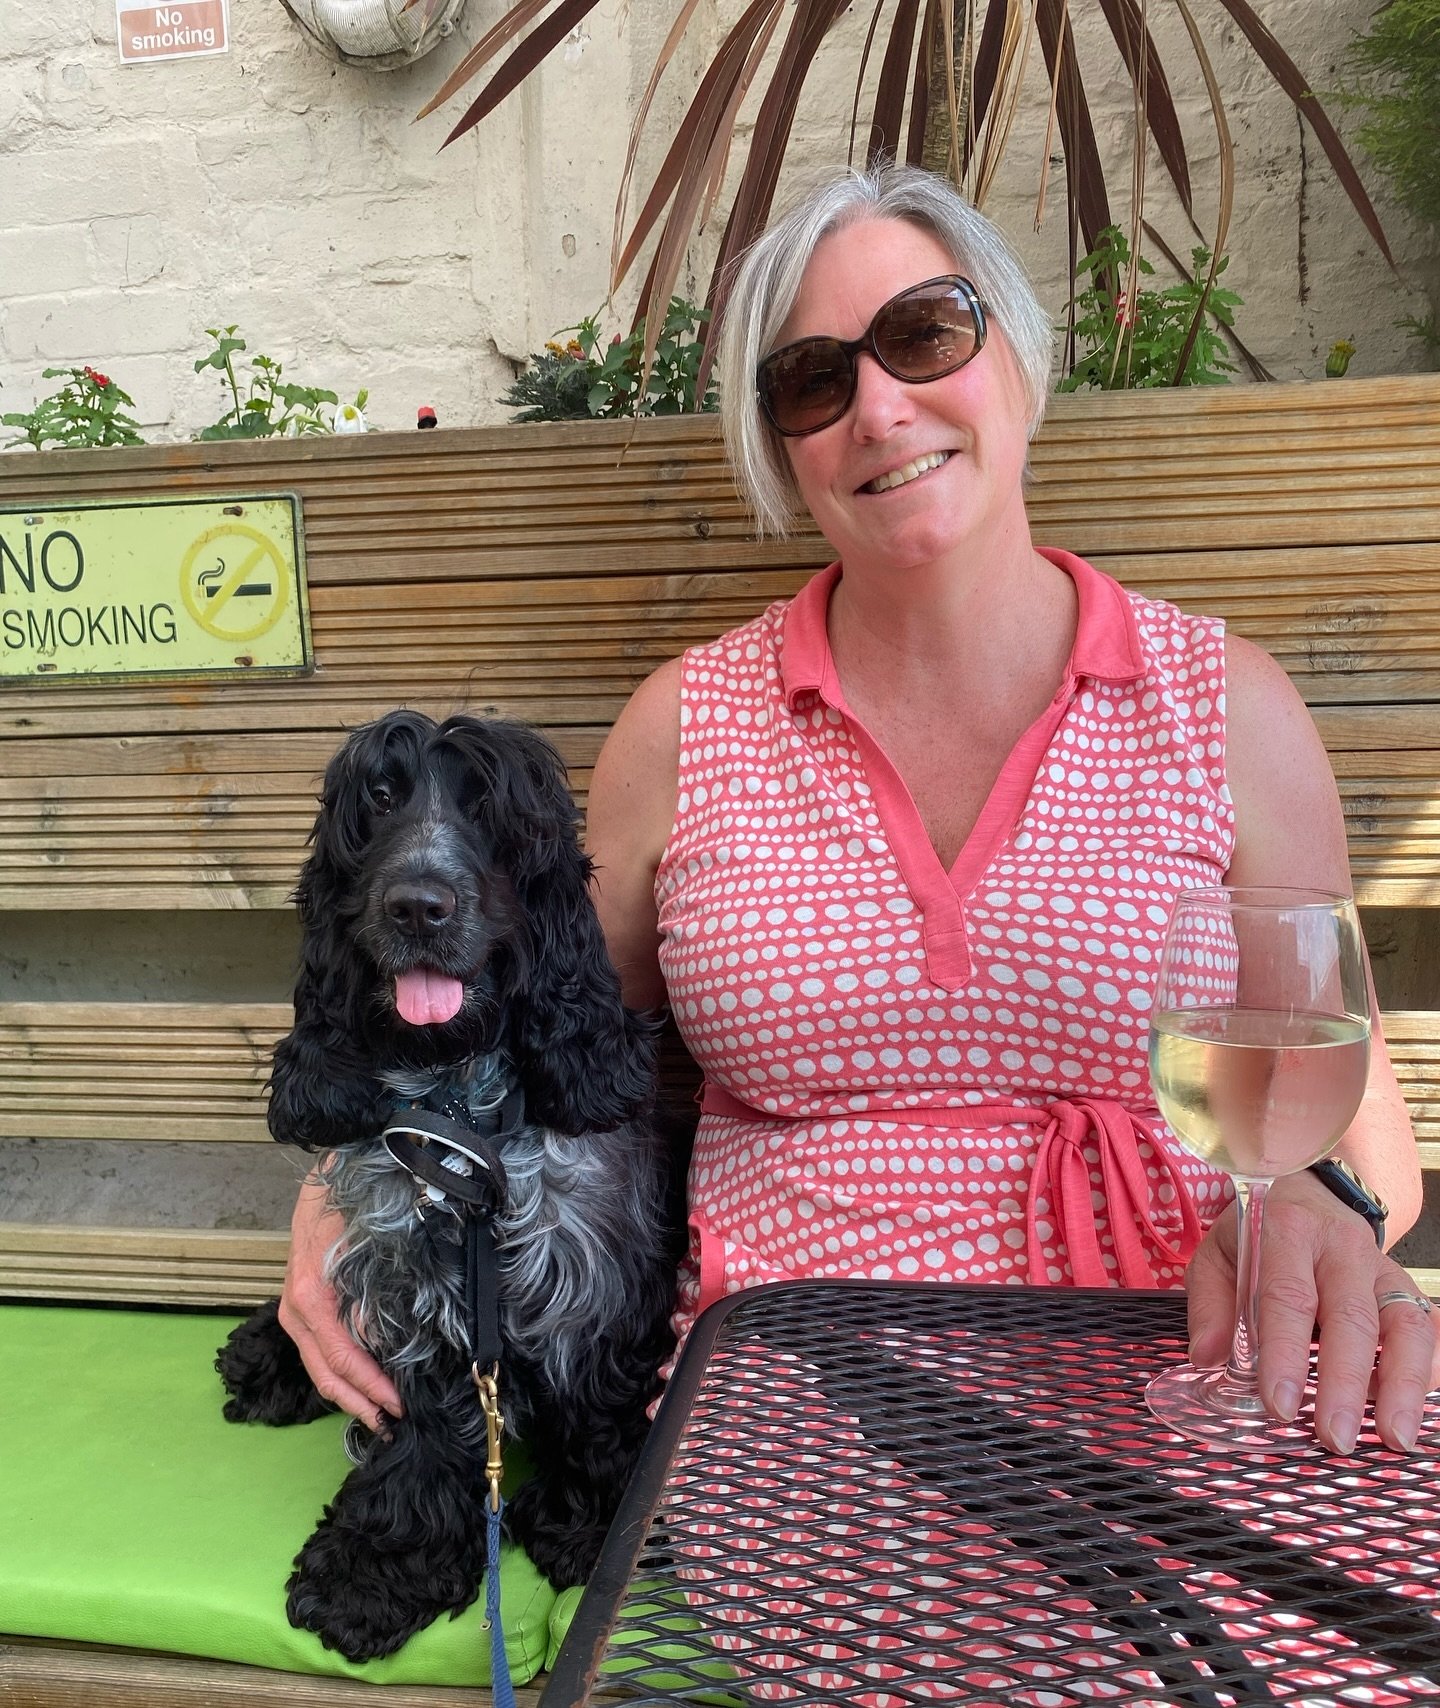 Some drinks in the sun around Wapping with my fur baby @i.am.pepper.the.cocker.spaniel (and Mike) after dropping my youngest baby at school for his year 6 residential. 

Emotional Mum as we&rsquo;re soon to be moving on from our lovely primary school